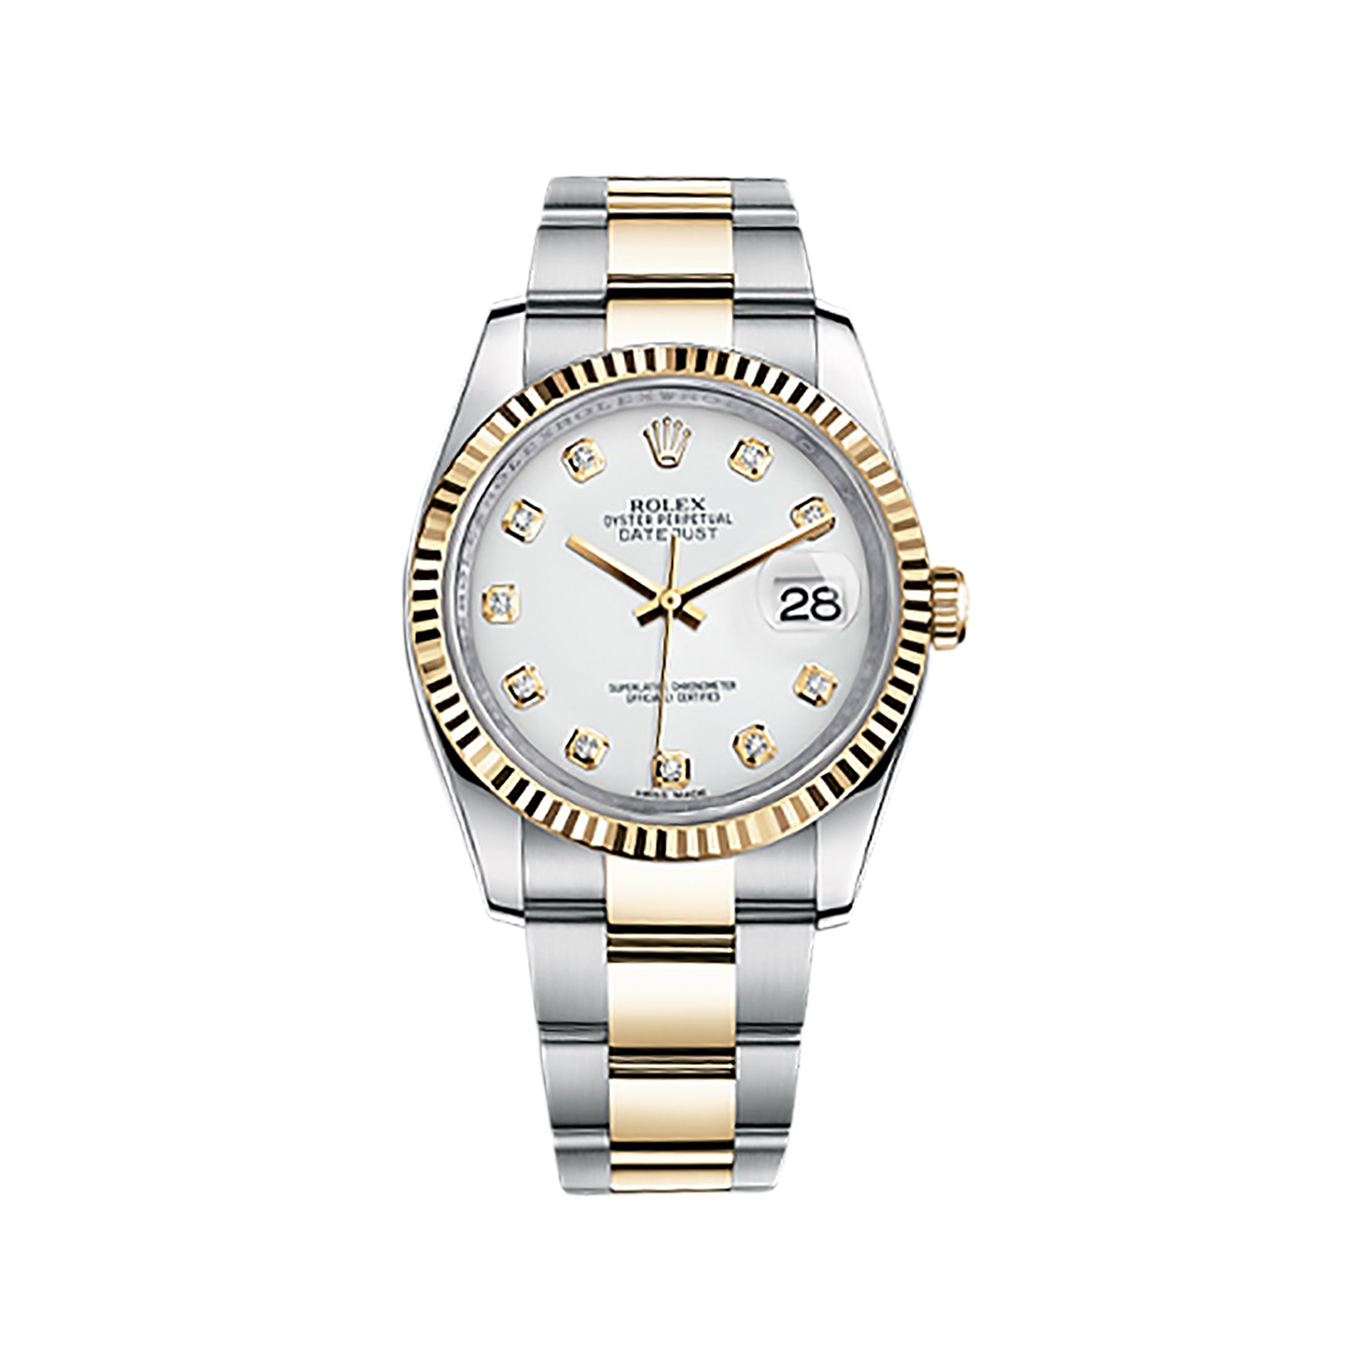 Datejust 36 116233 Gold & Stainless Steel Watch (White Set with Diamonds) - Click Image to Close